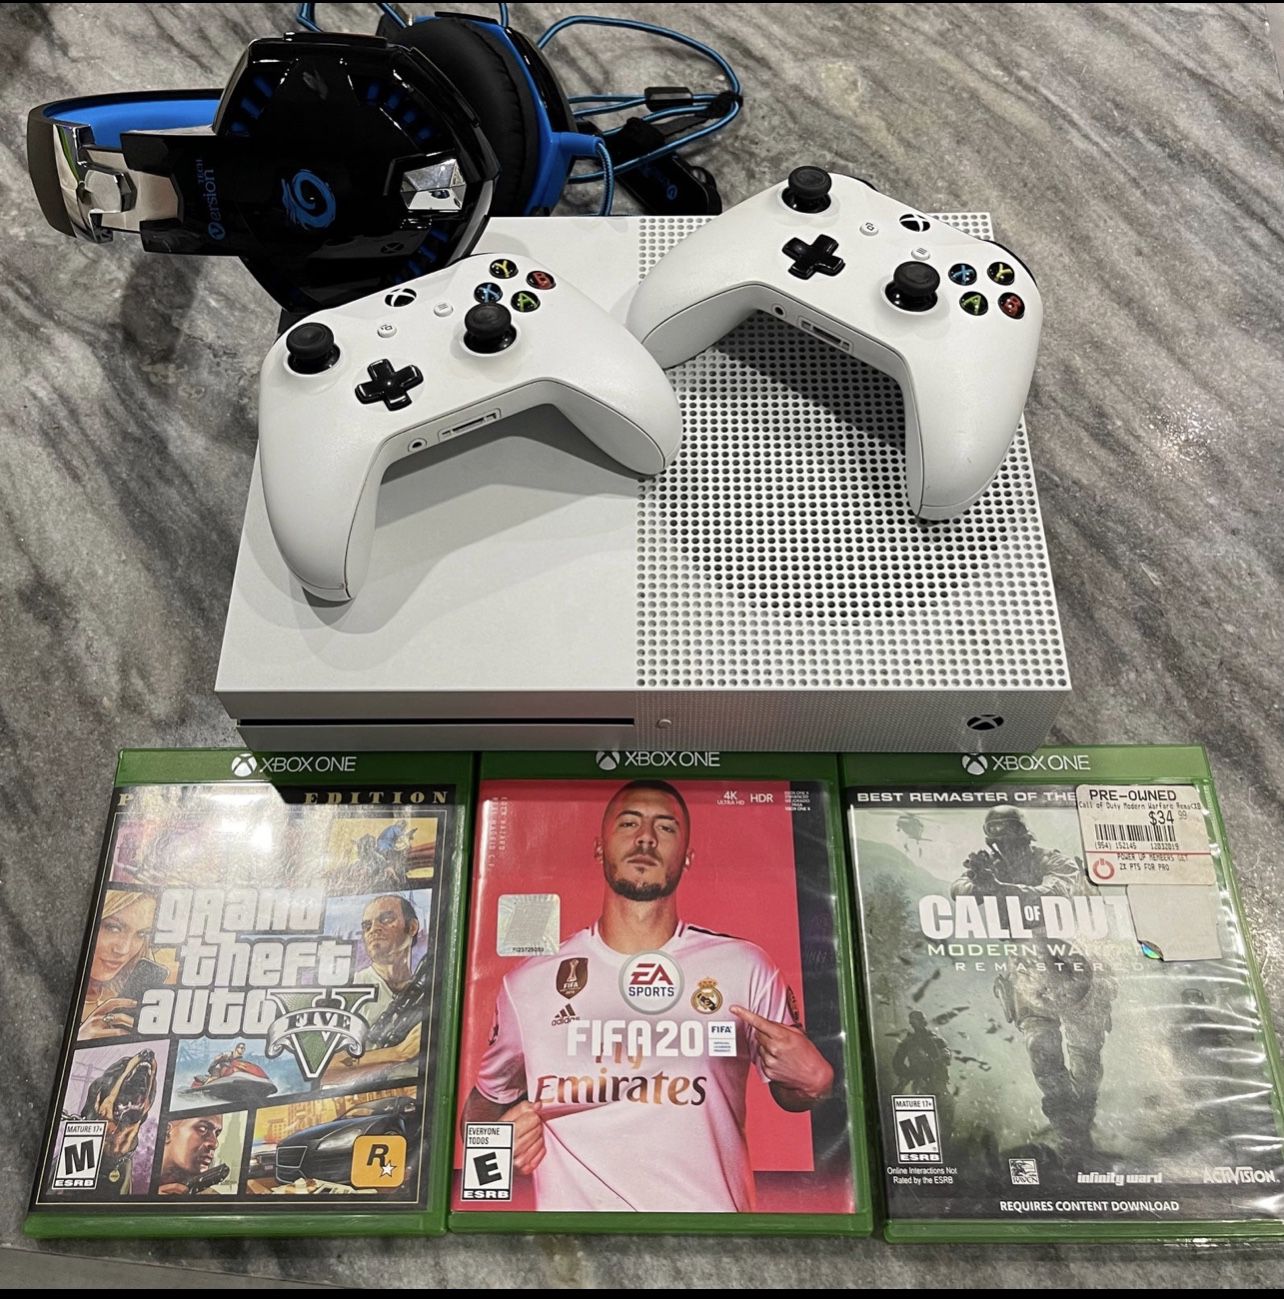 Xbox One S 1TB memory with 2 controllers 3 games and gaming headphones